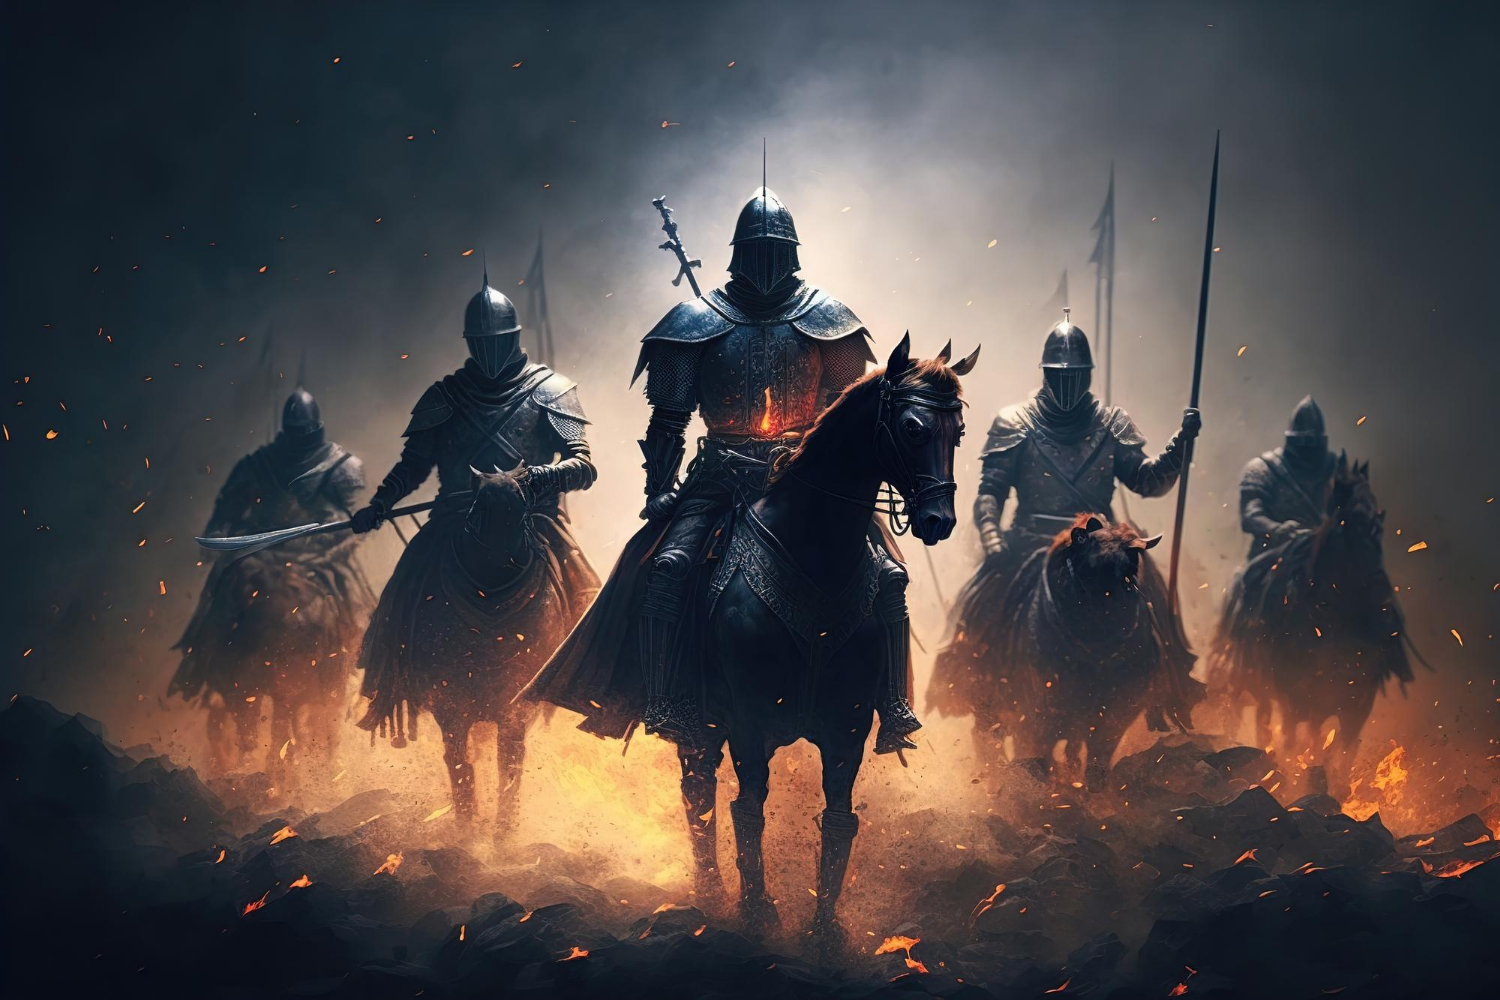 battle-knights-armor-battlefield-struggle-good-against-evil-knights-riders-galloping-horses-sparks-flames-portraits-warriors-3d-render